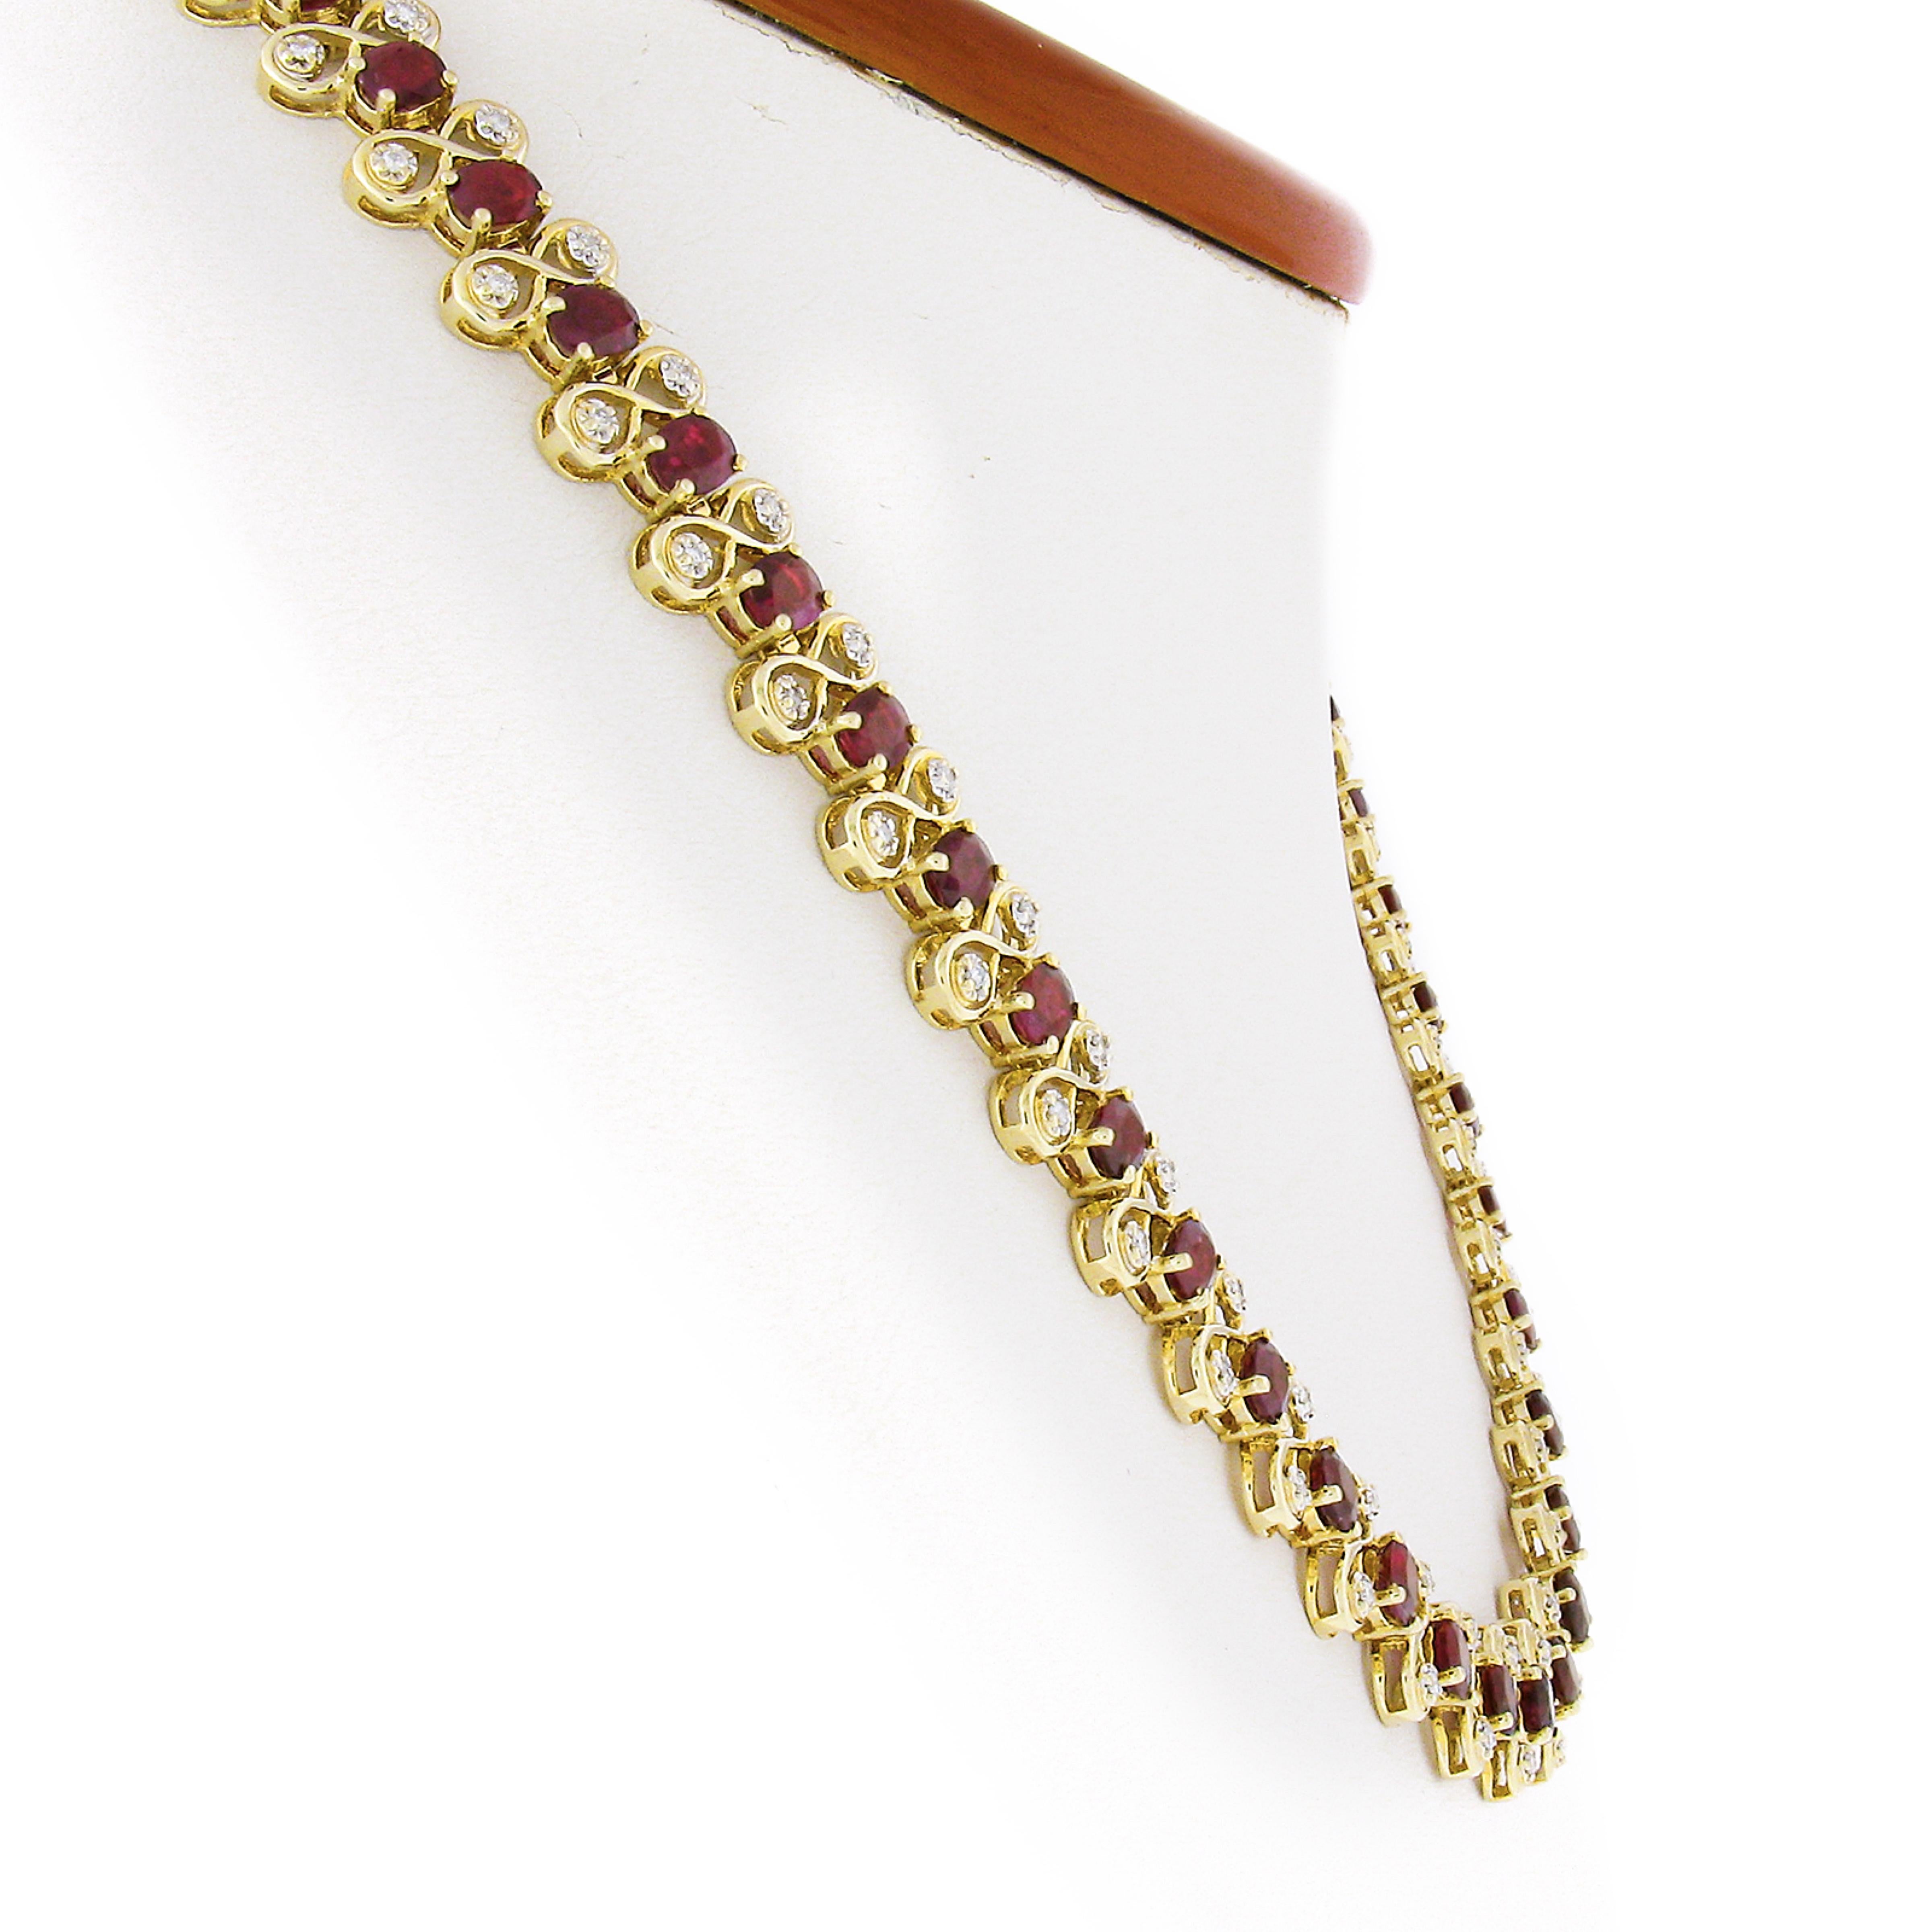 Vintage 14K Gold 21ctw GIA Burma Ruby & Diamond Figure 8 Link Statement Necklace In Excellent Condition For Sale In Montclair, NJ